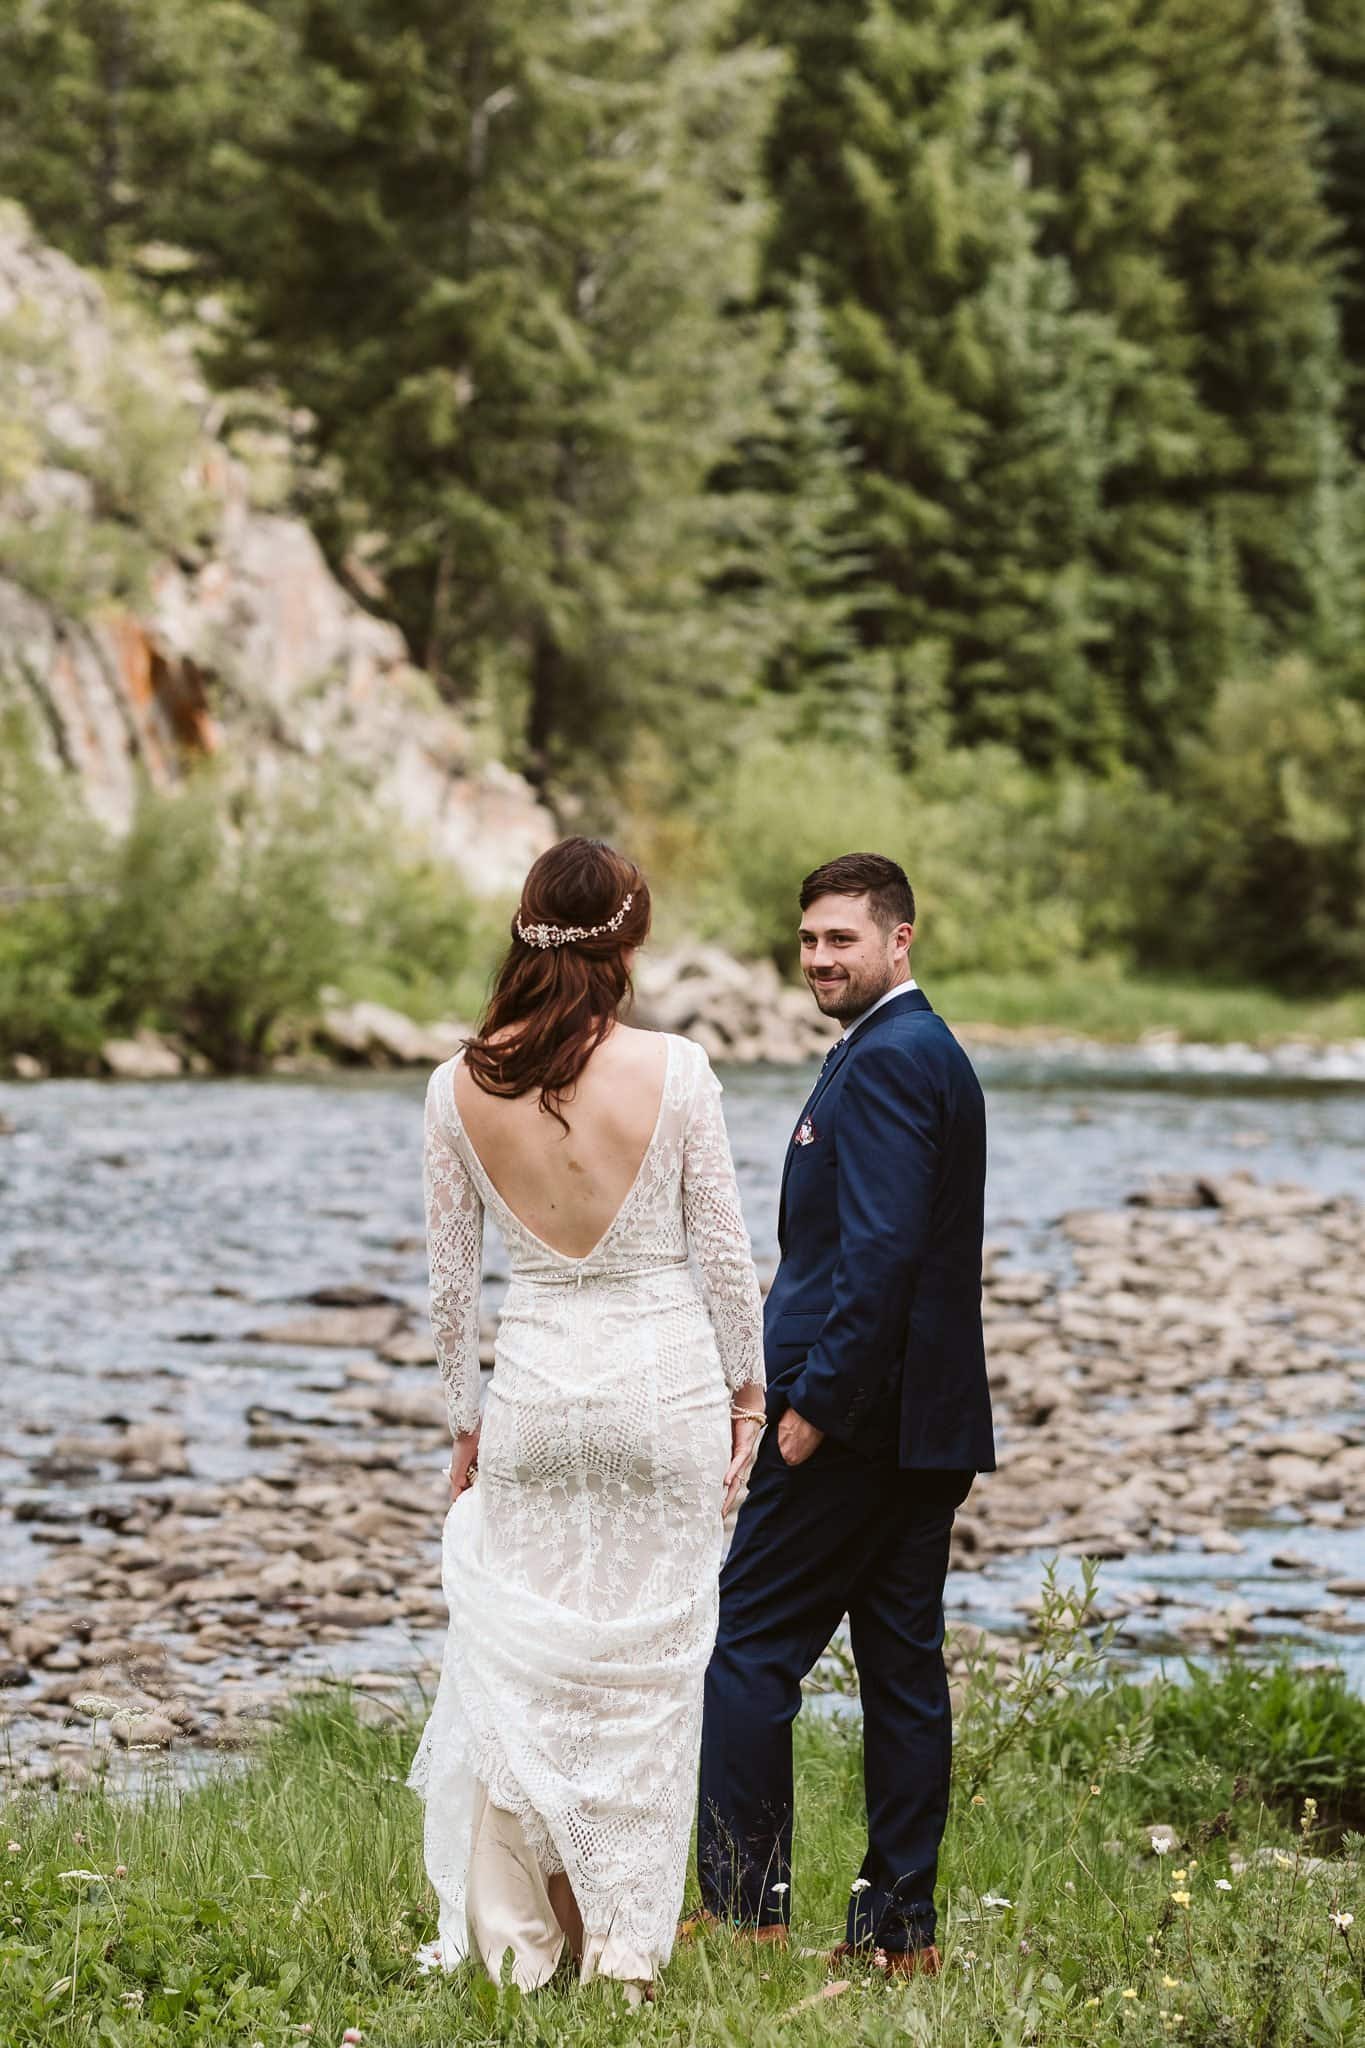 Bride and groom first look by a river in Colorado, Rivertree Lodge wedding photographer